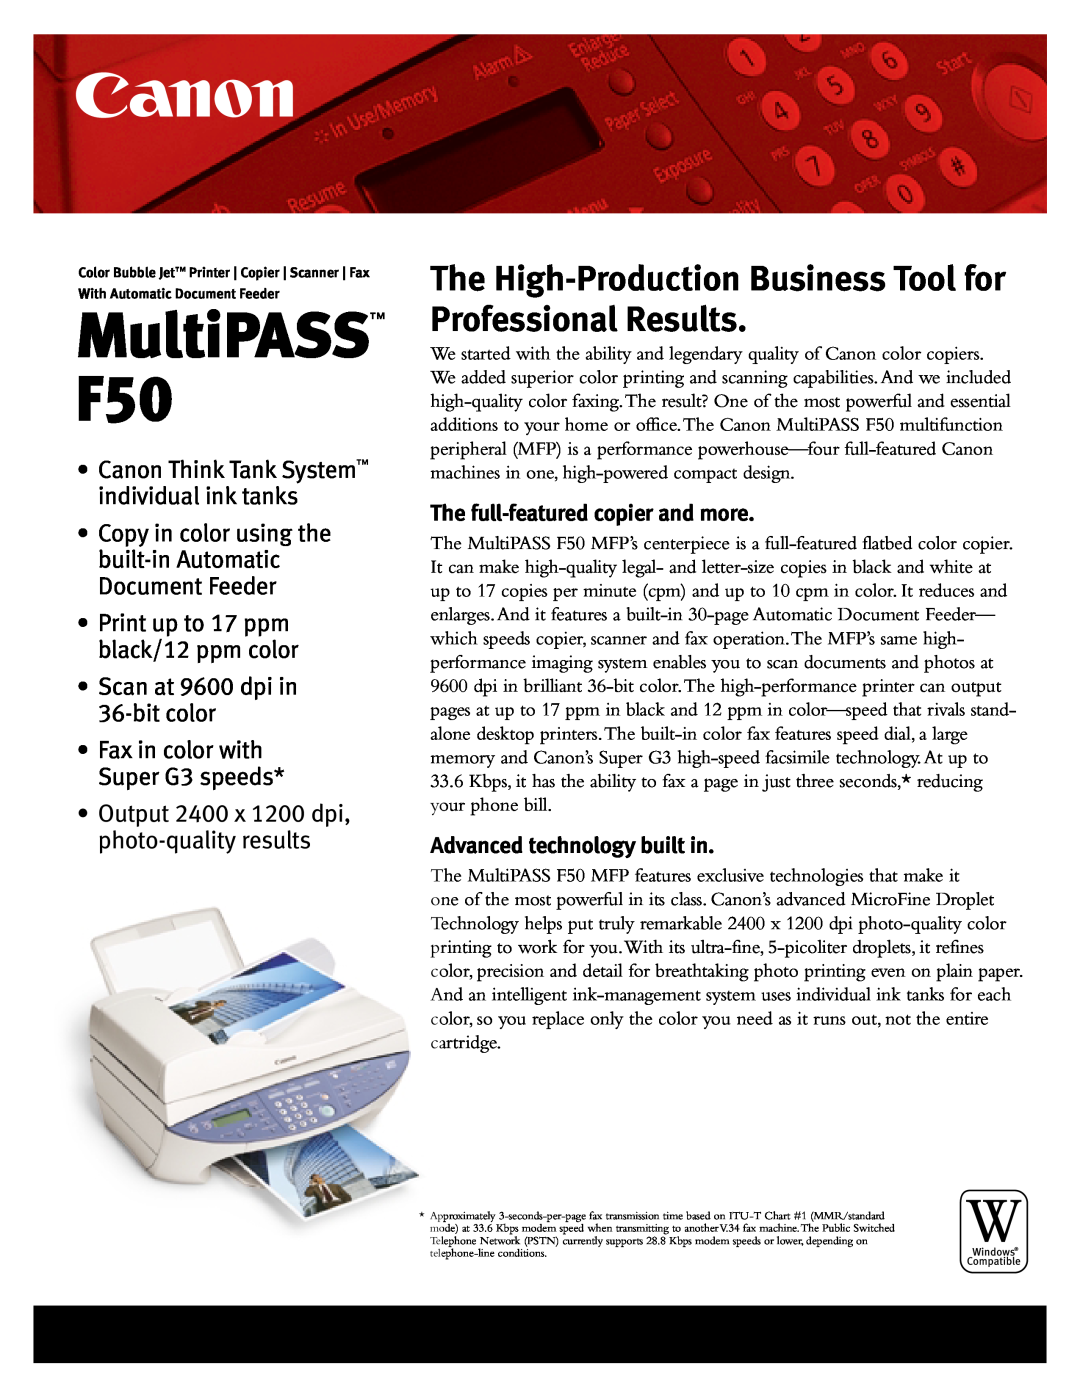 Canon manual MultiPASS F50, The full-featured copier and more, Advanced technology built in 